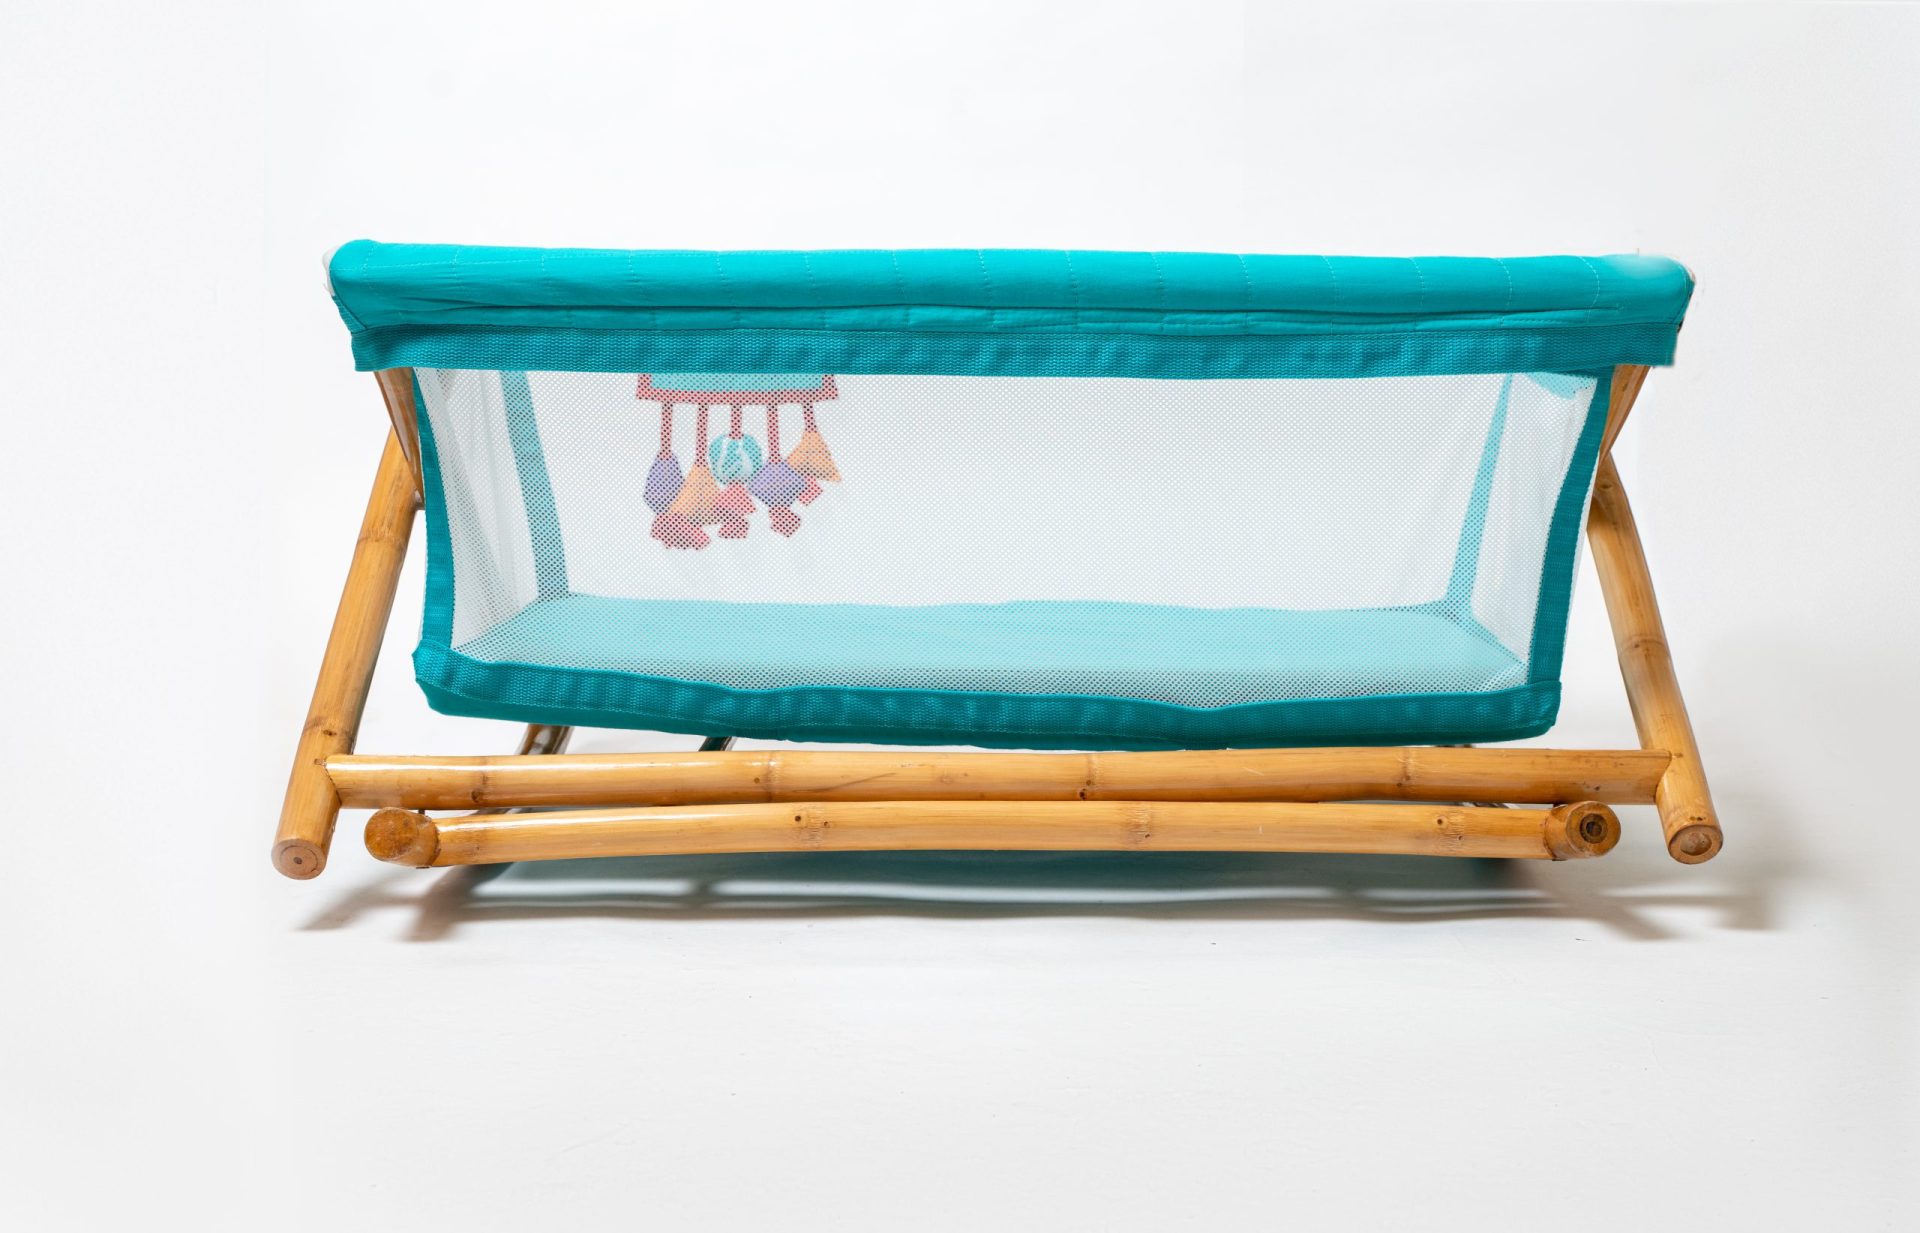 New Product Alert: Giving Cradle